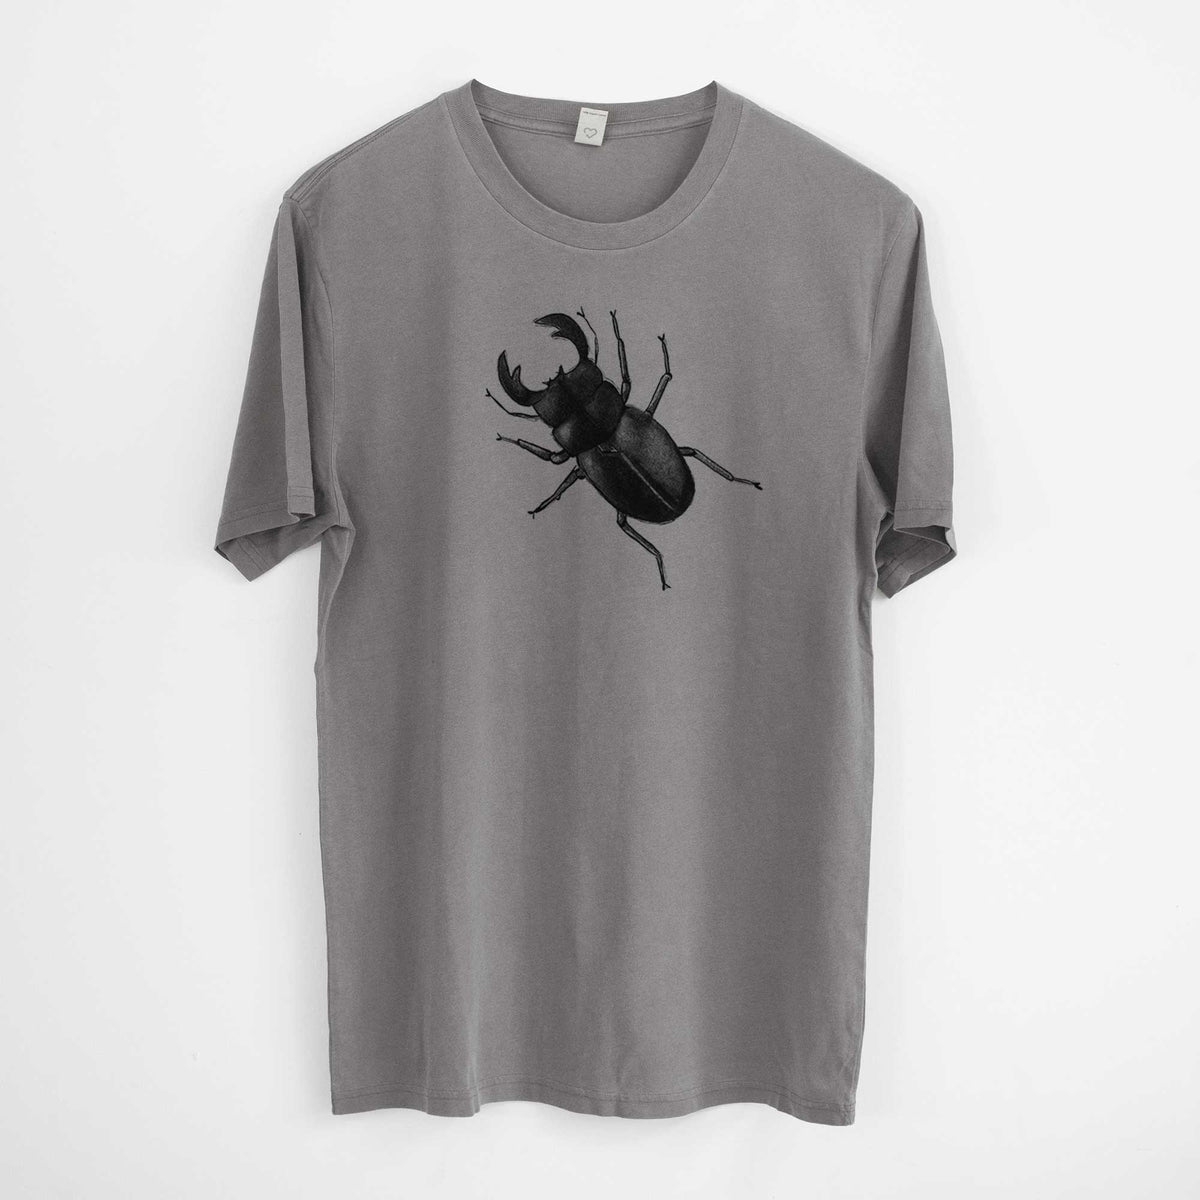 Dorcus titanus - Giant Stag Beetle -  Mineral Wash 100% Organic Cotton Short Sleeve